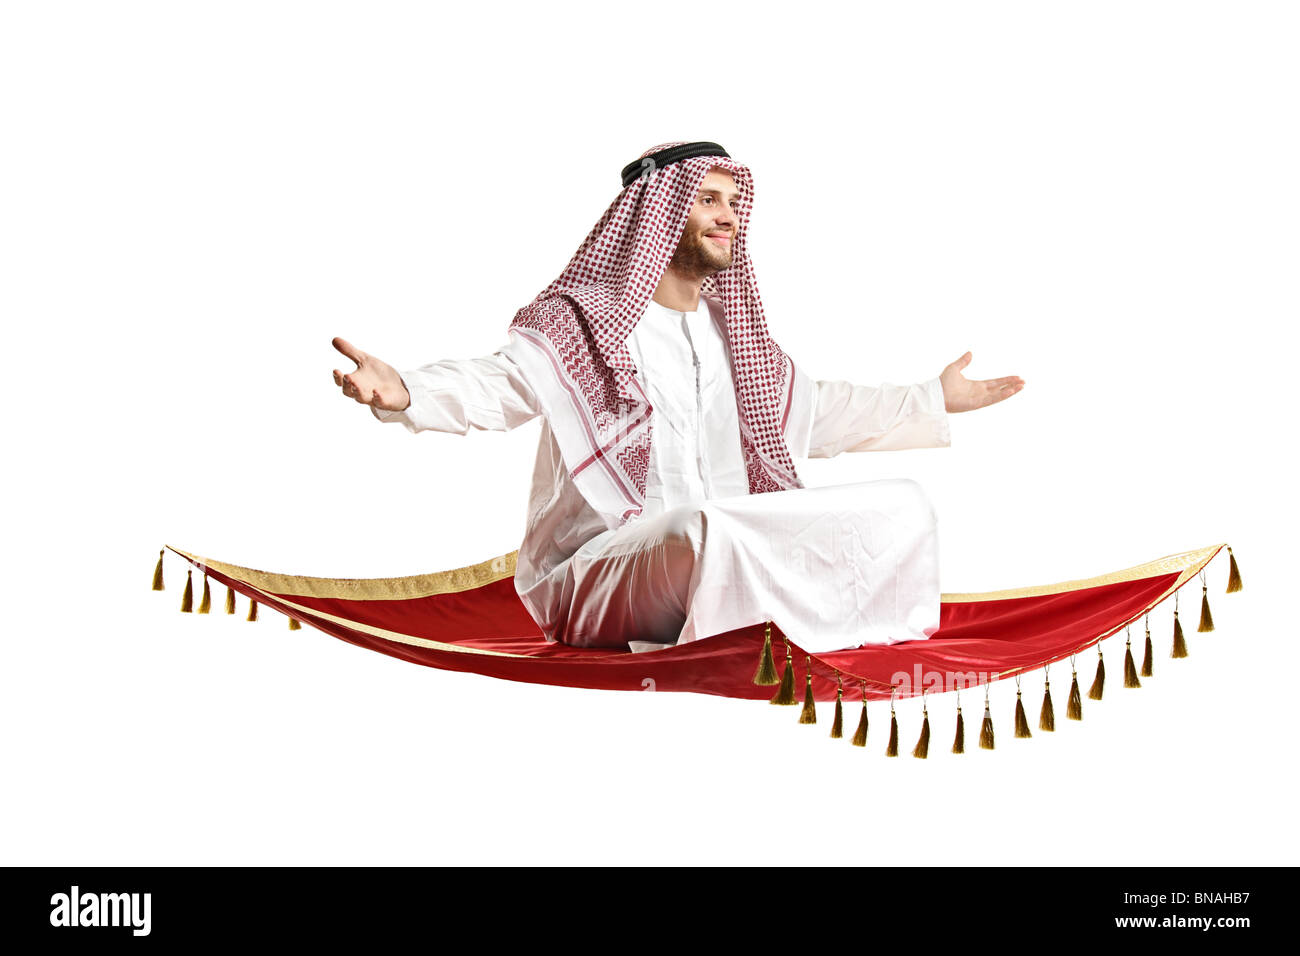 An Arab person sitting on a flying carpet Stock Photo